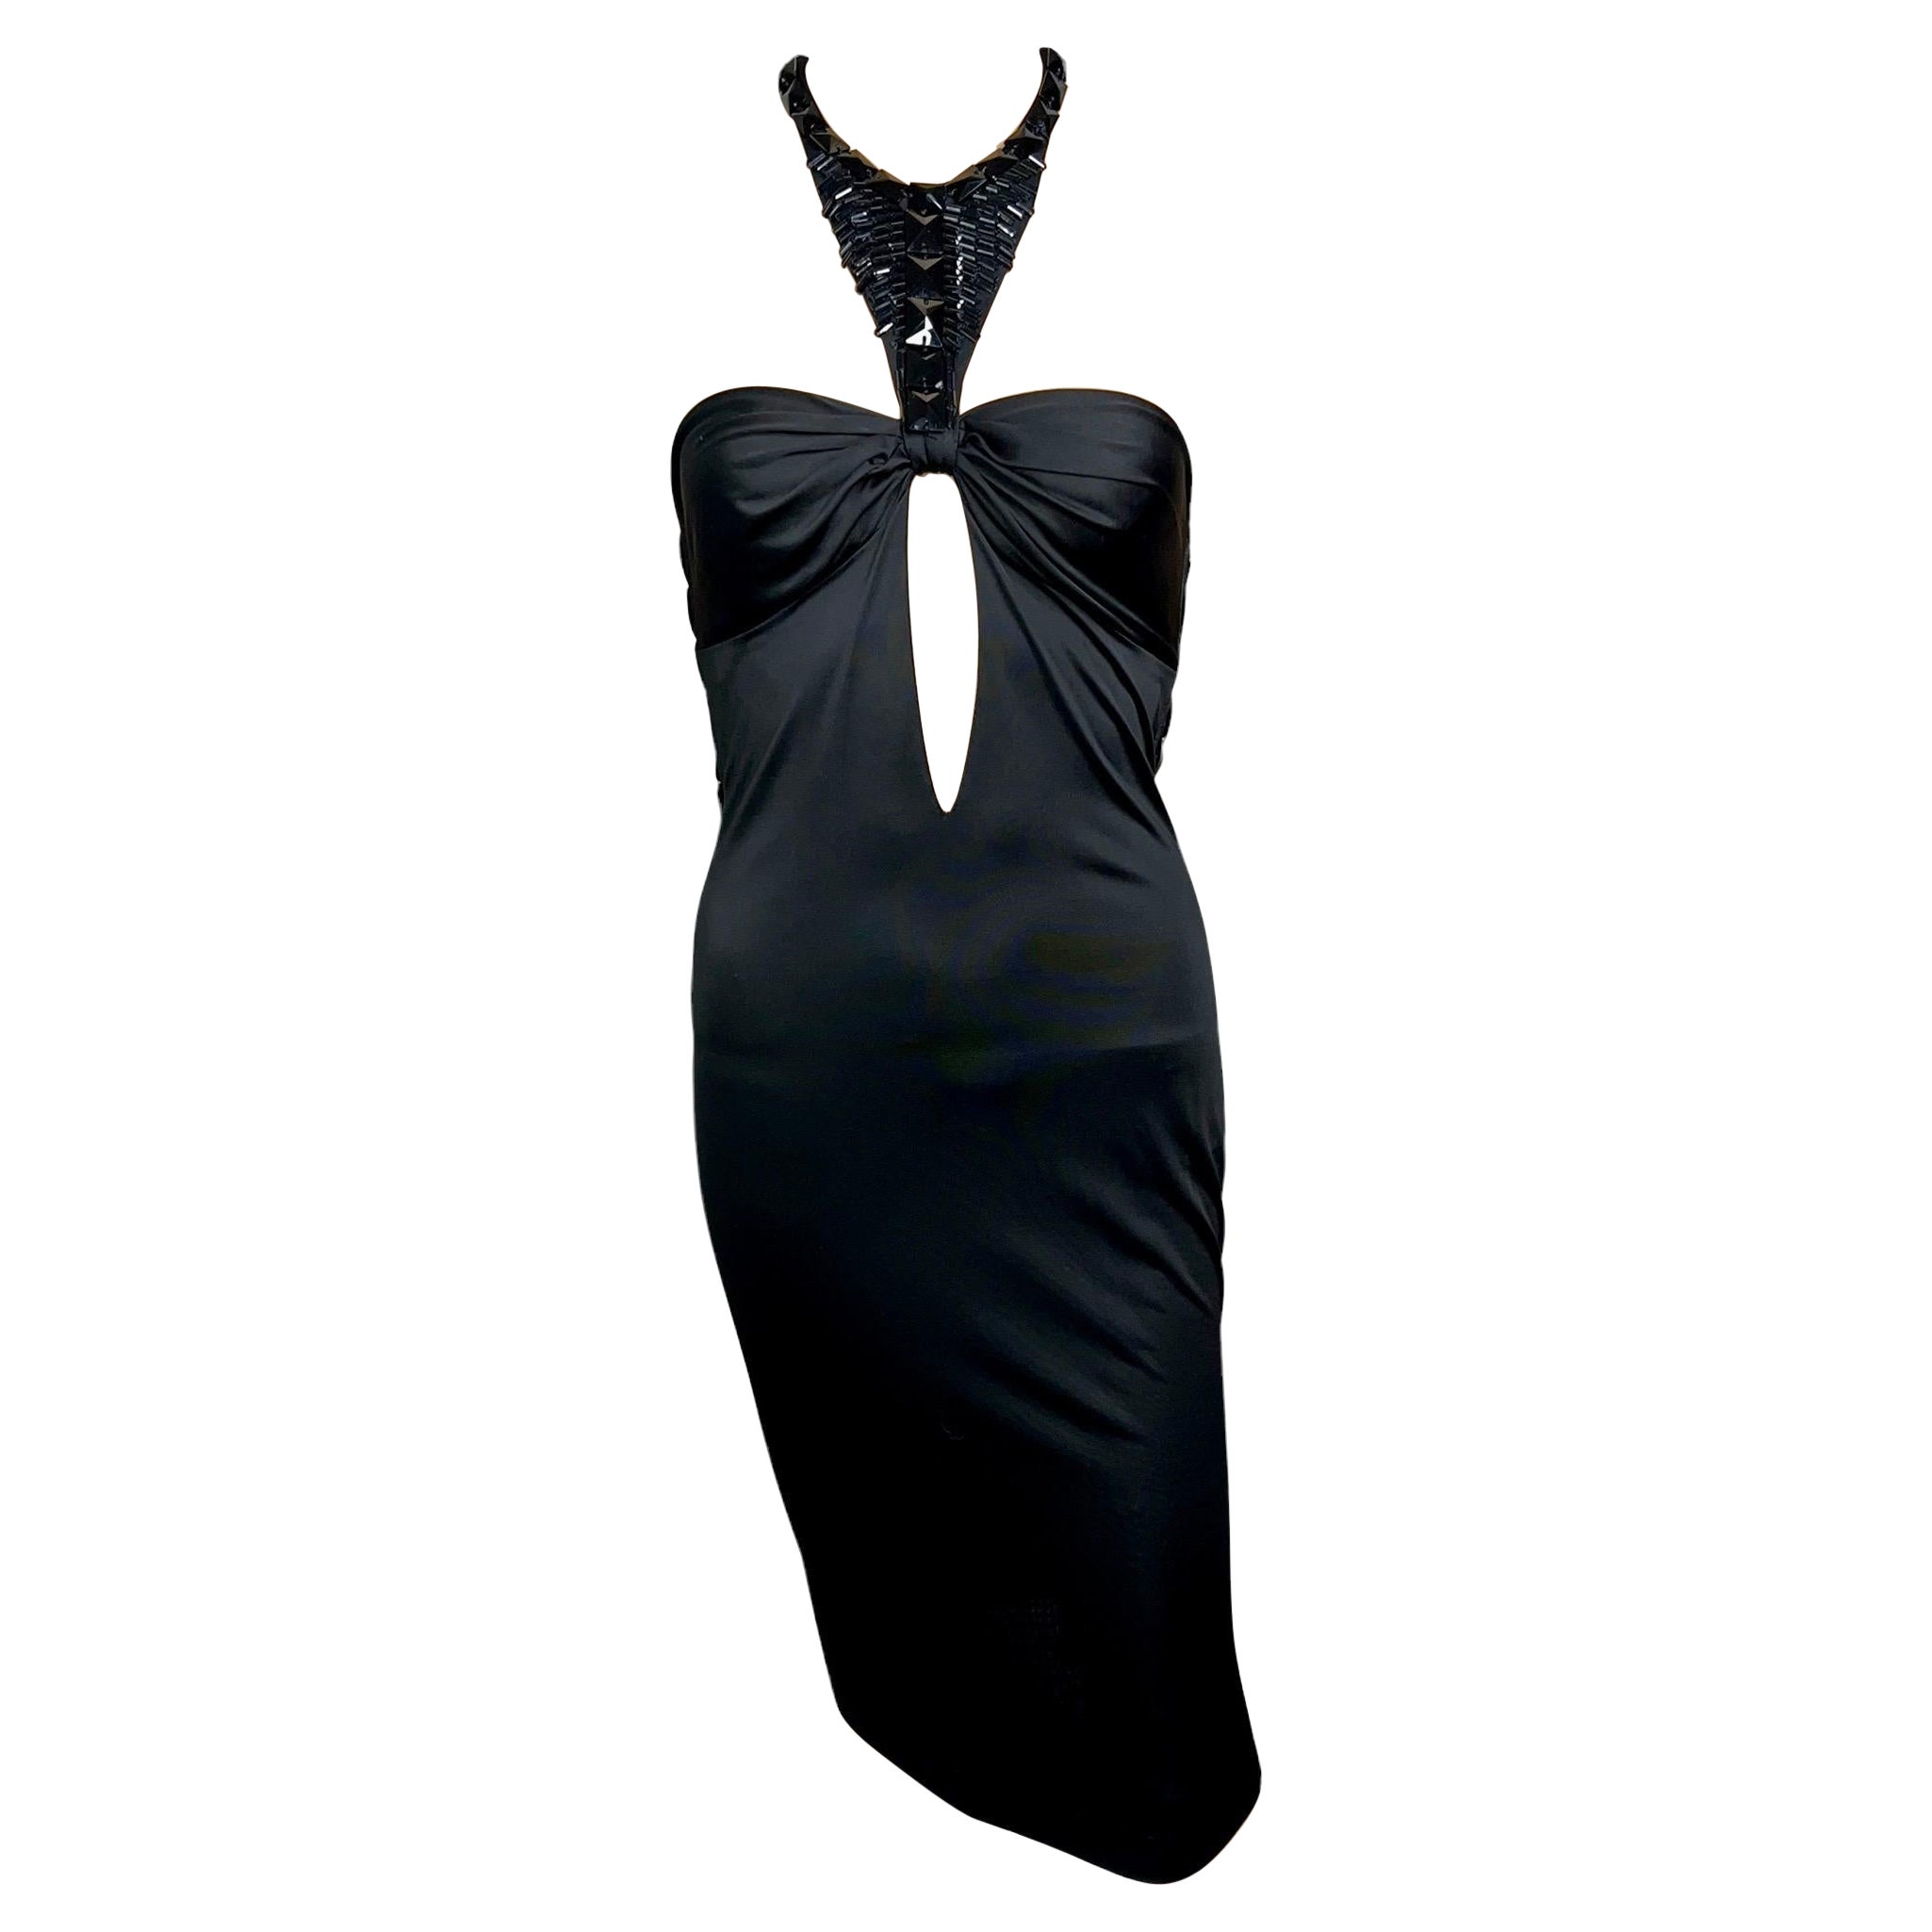 Tom Ford for Gucci F/W 2004 Embellished Plunging Cutout Black Evening Dress  For Sale